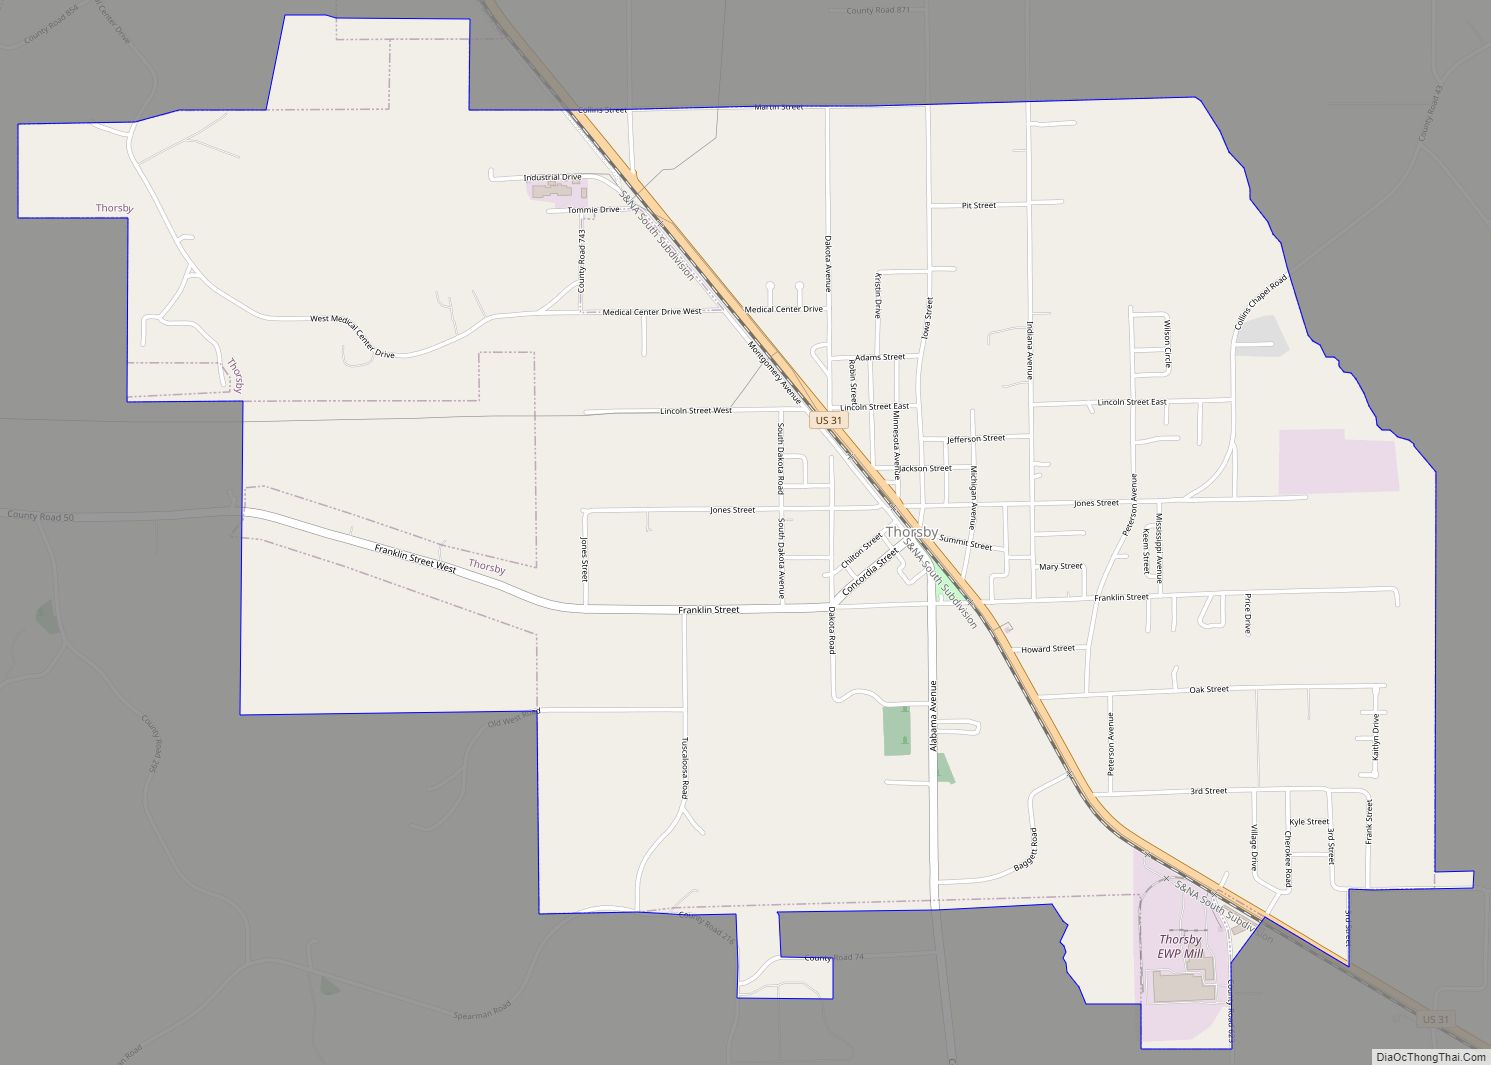 Map of Thorsby town